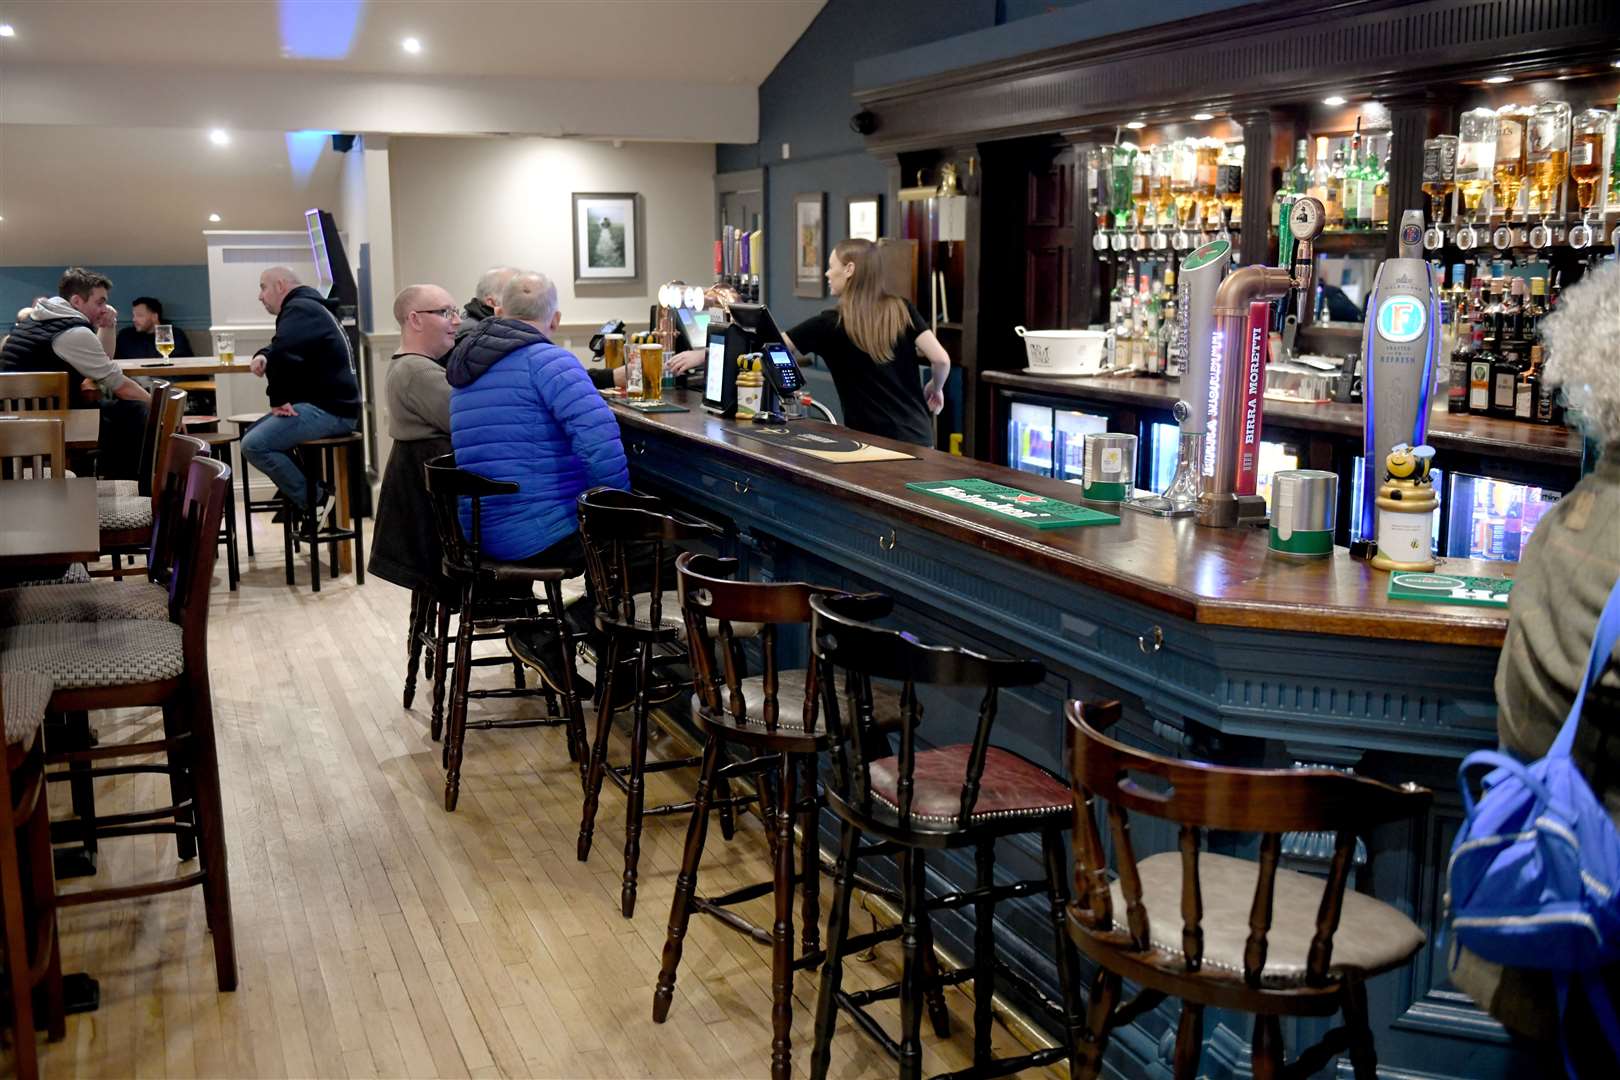 The bar at the Blacksmiths in Culloden. Picture: James Mackenzie.